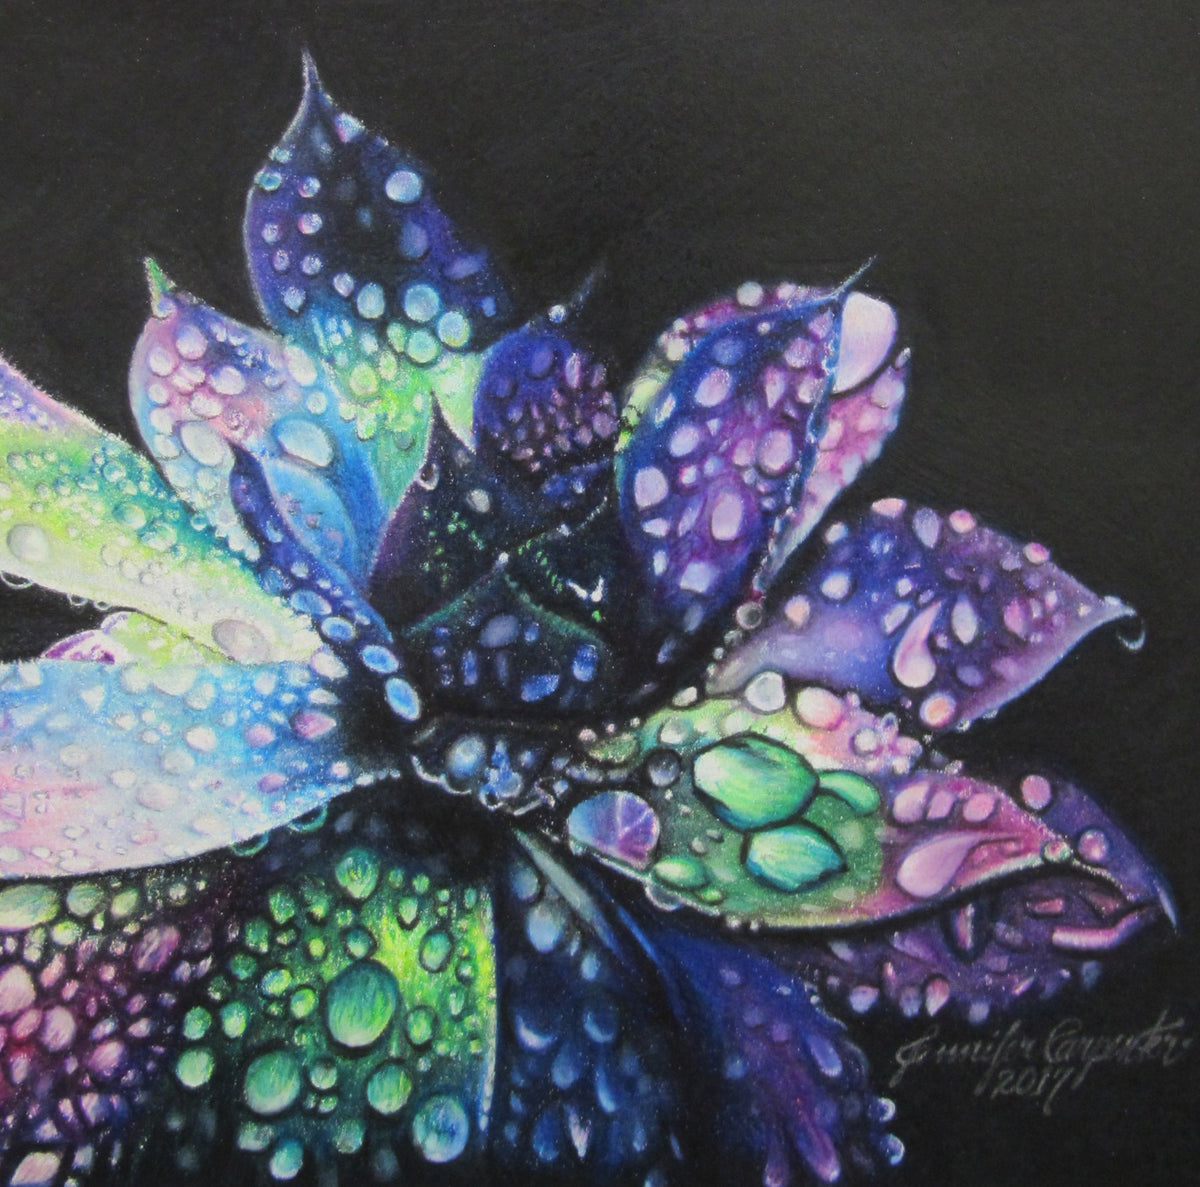 "Succulent" by Jennifer Carpenter - giclee reproduction